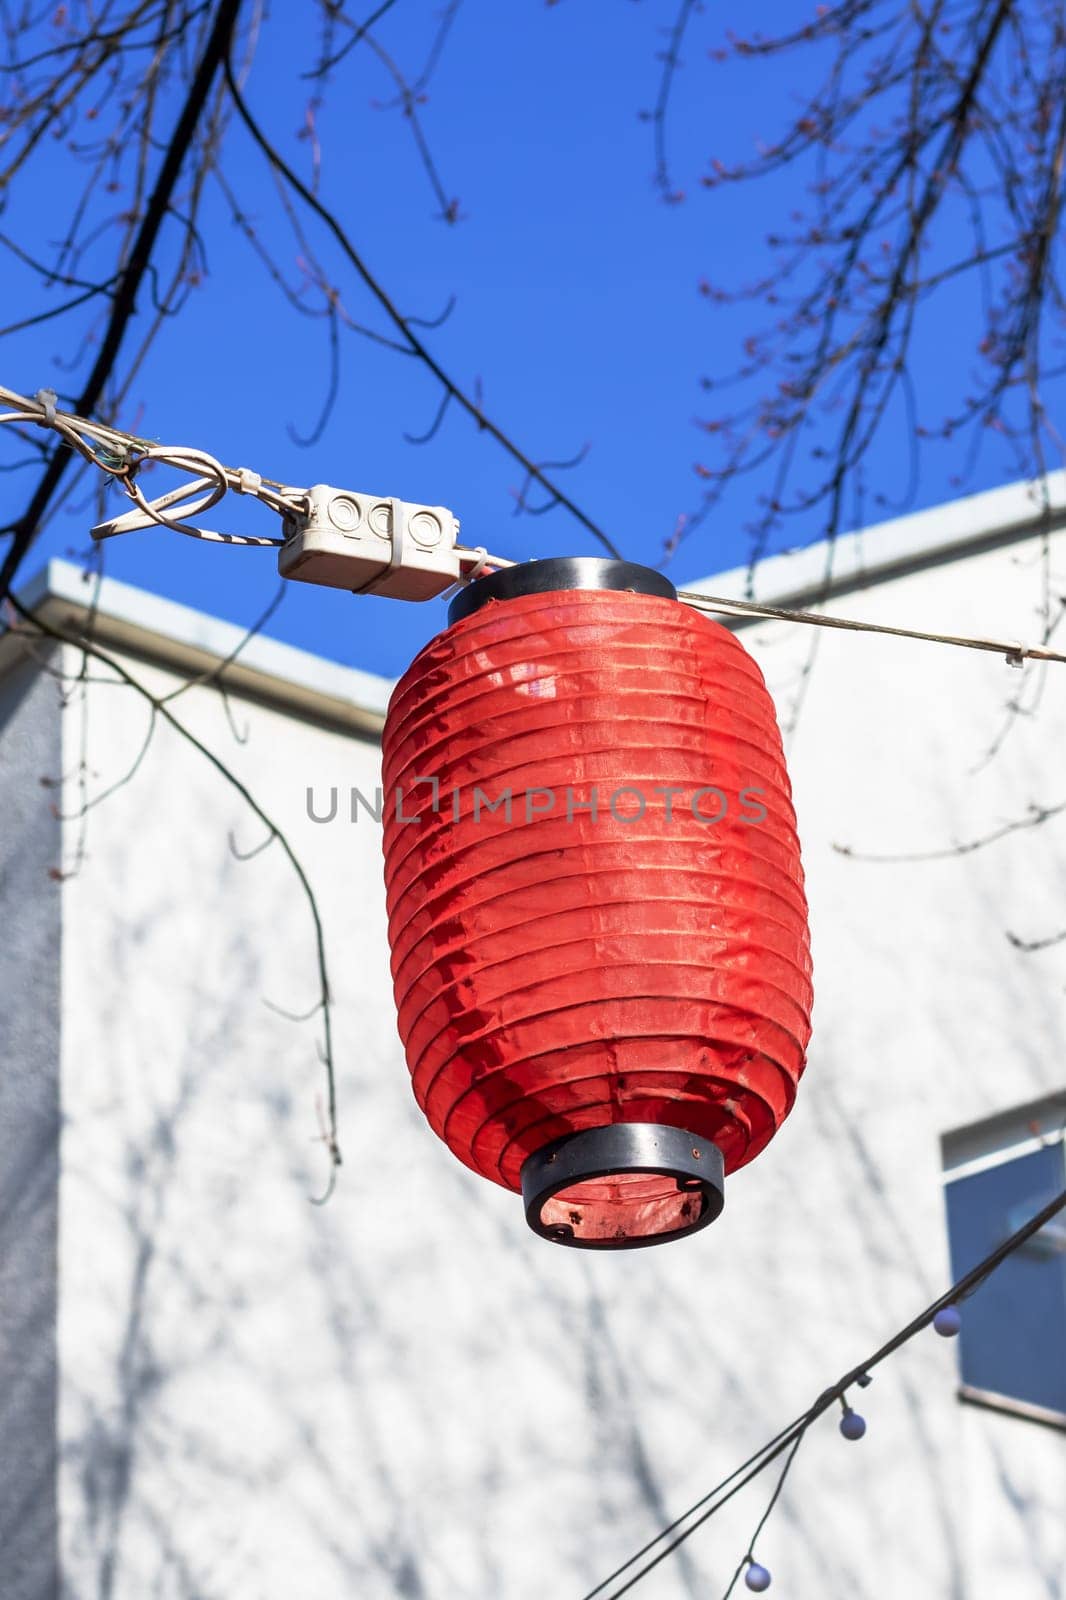 A red lantern hangs from an overhead power line against a freezing electric blue sky, in front of a building with a woody plant and tree branches